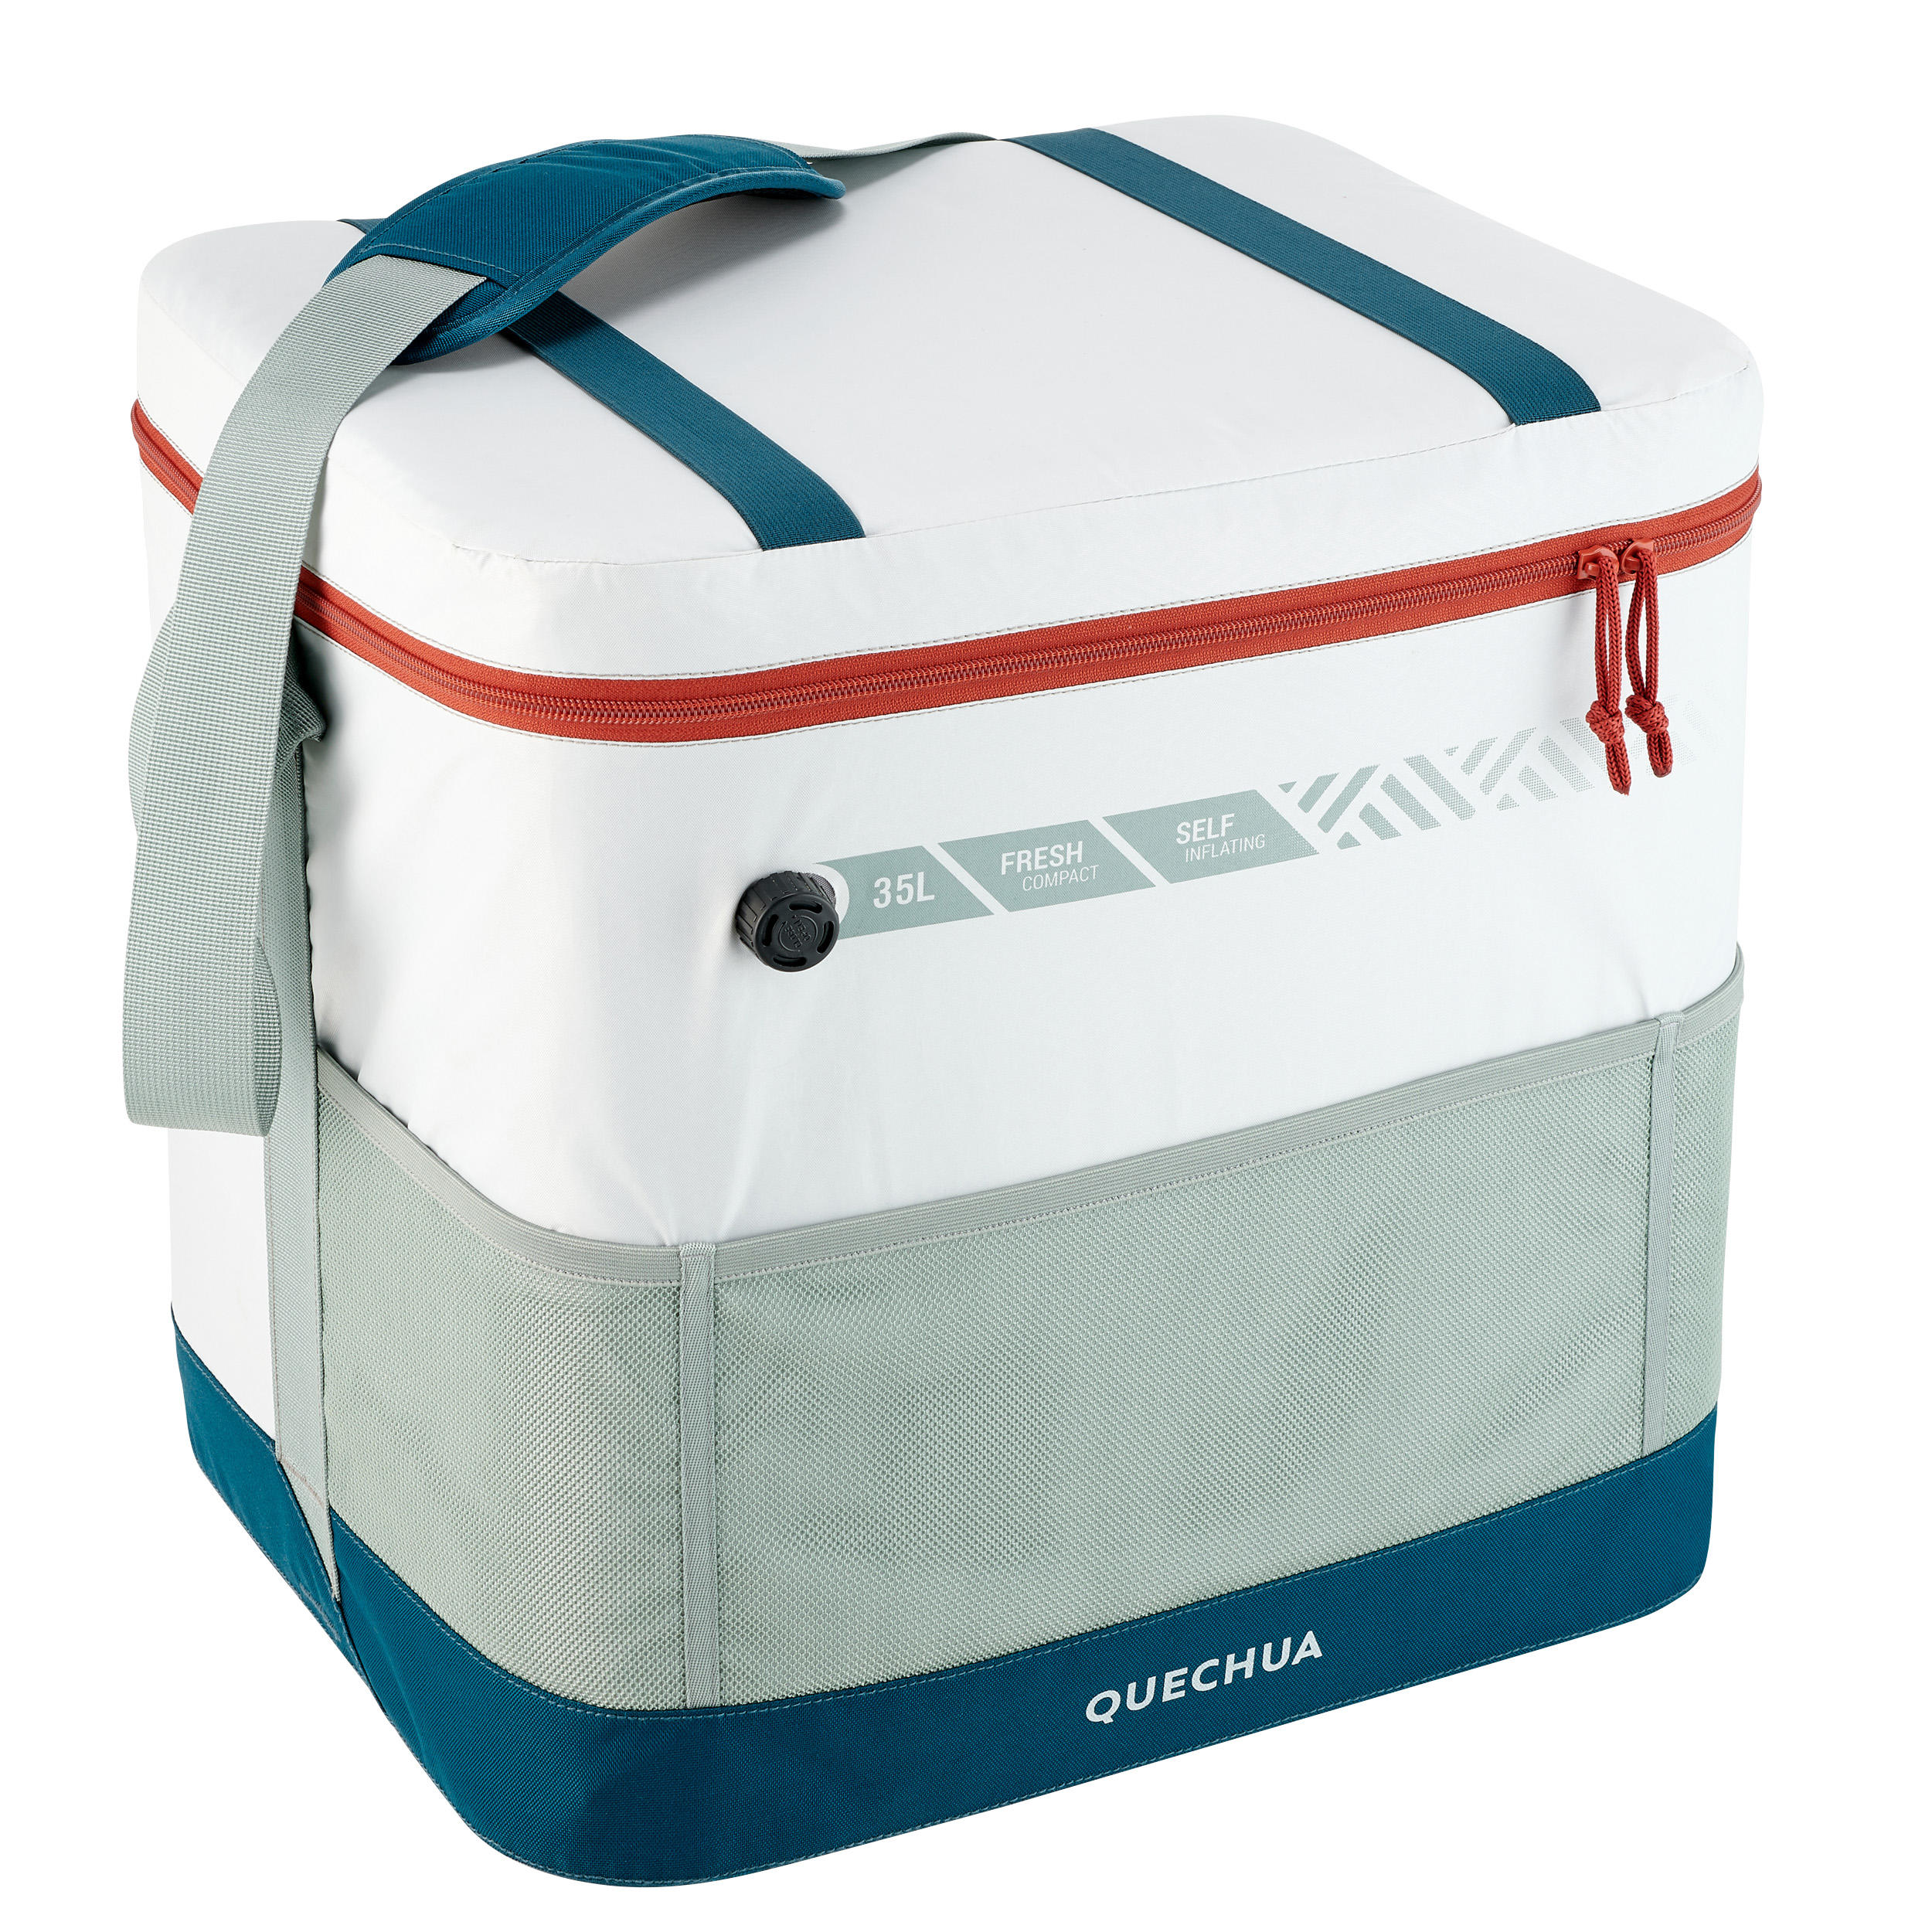 10 Best Breast Milk Cooler Bags For Pumping Moms To Keep Milk Cold